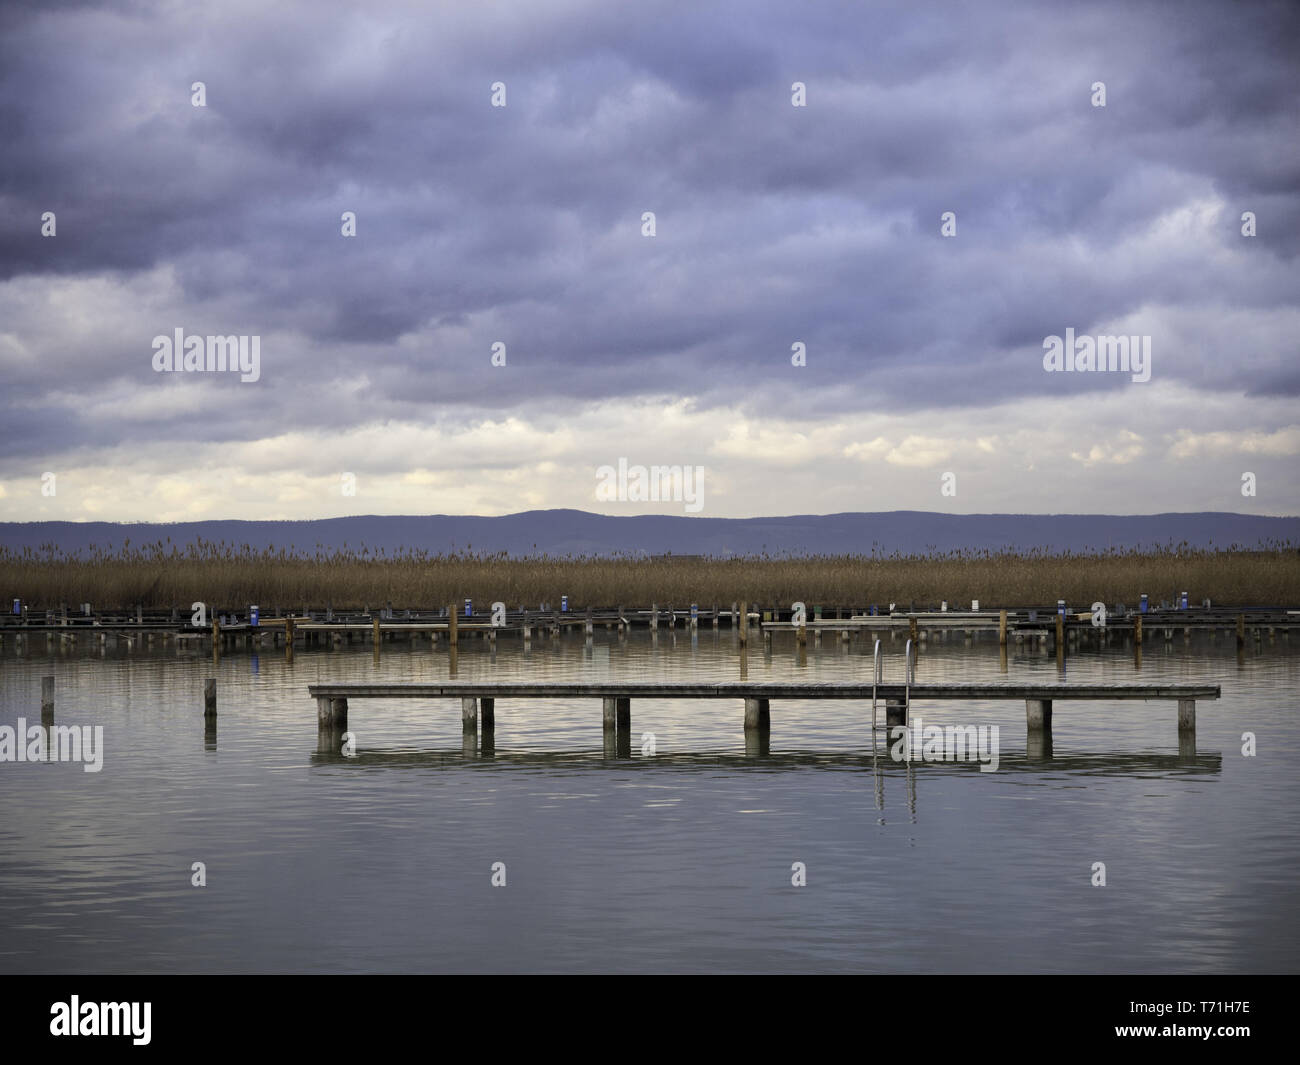 Bathing jetty on a lake in winter Stock Photo